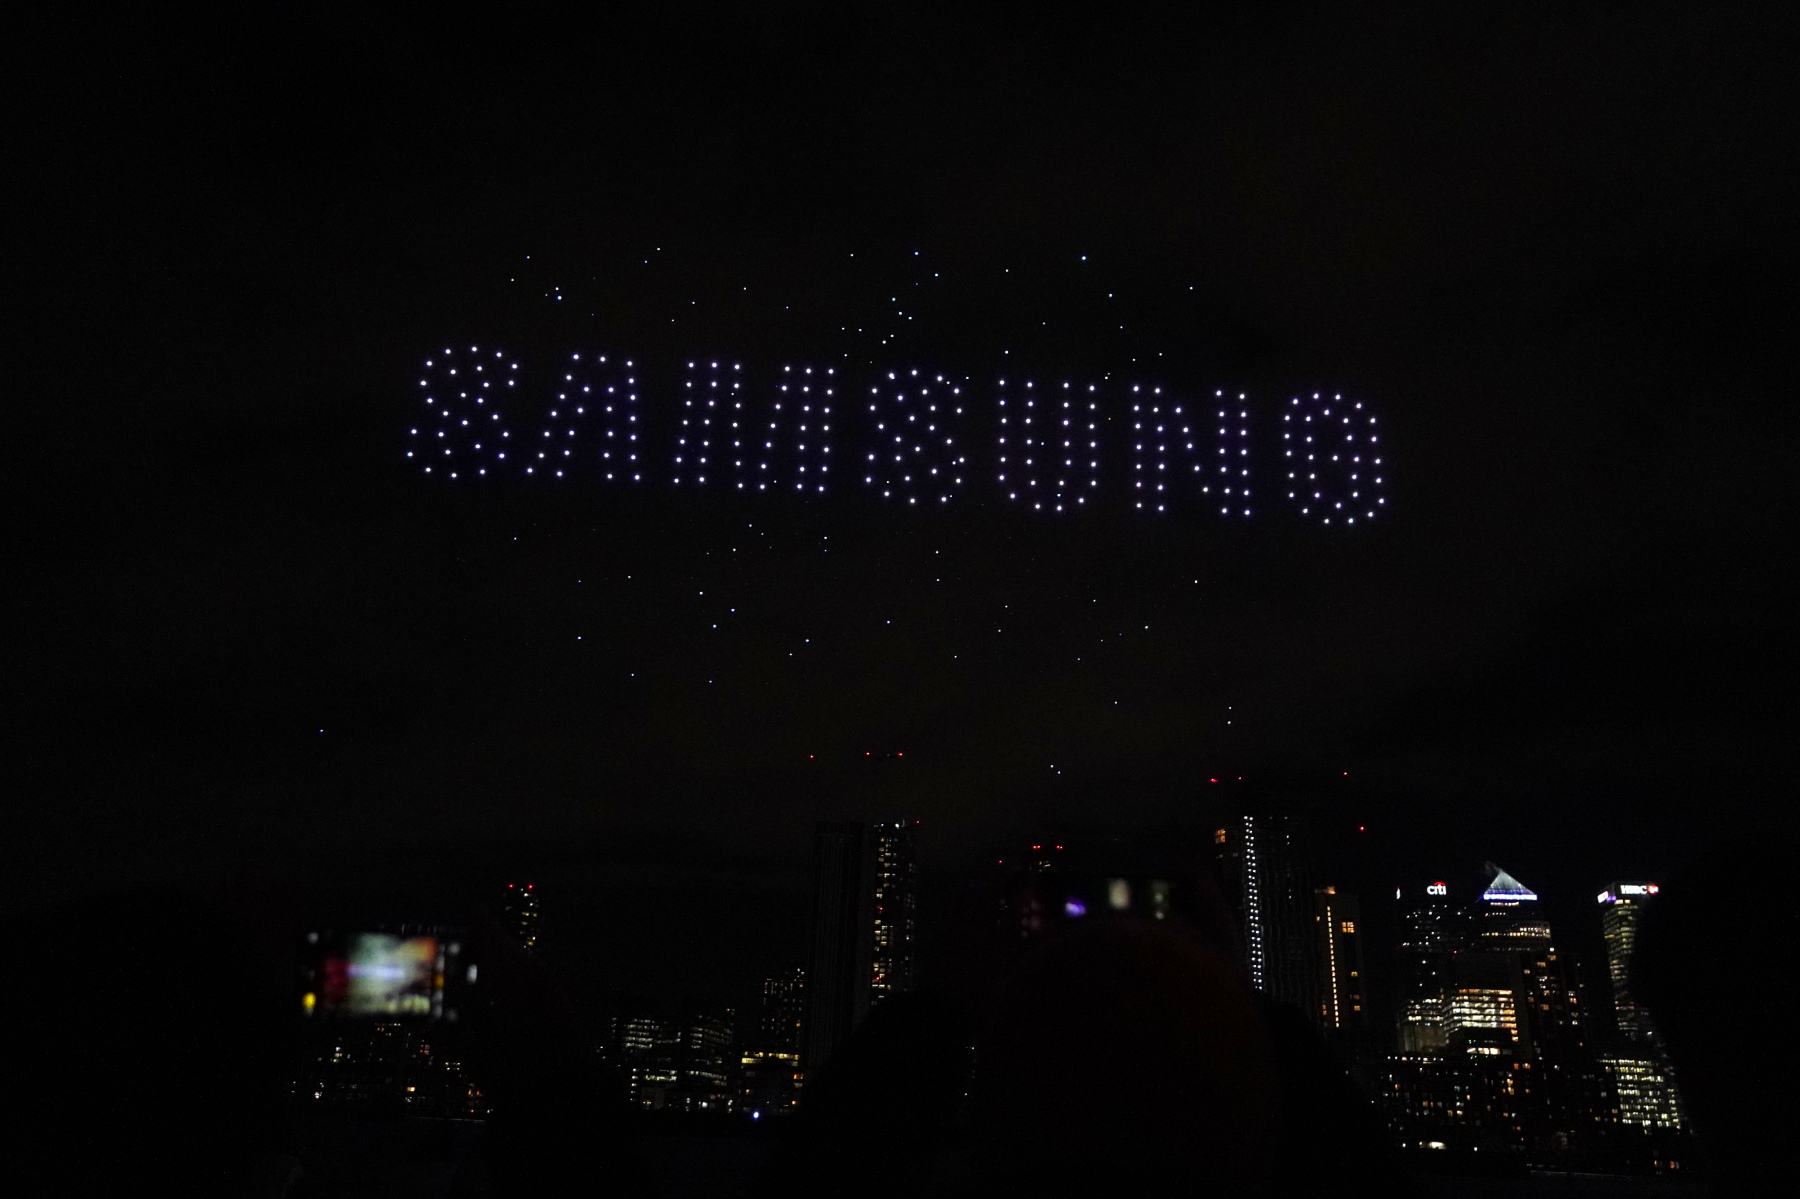 drones spelling out 'Samsung' in the skies near Canary Wharf to mark the launch of the Galaxy S24 series Android smartphones